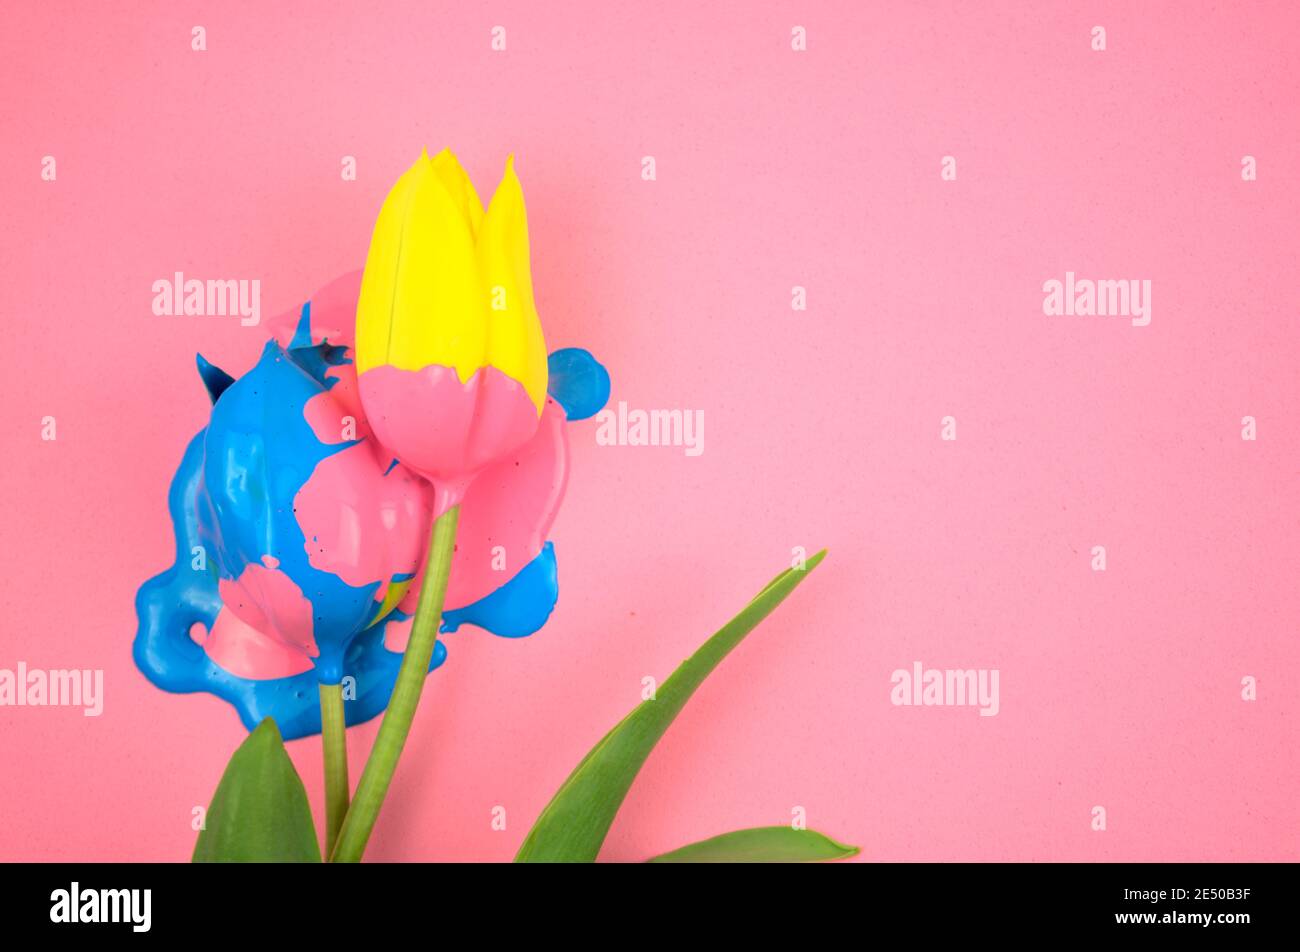 Colorful acrylic and yellow flower, tulip flat lay on clear pink background. Dripping vivid candy ink medium colors, blue, pink on floral. Stock Photo